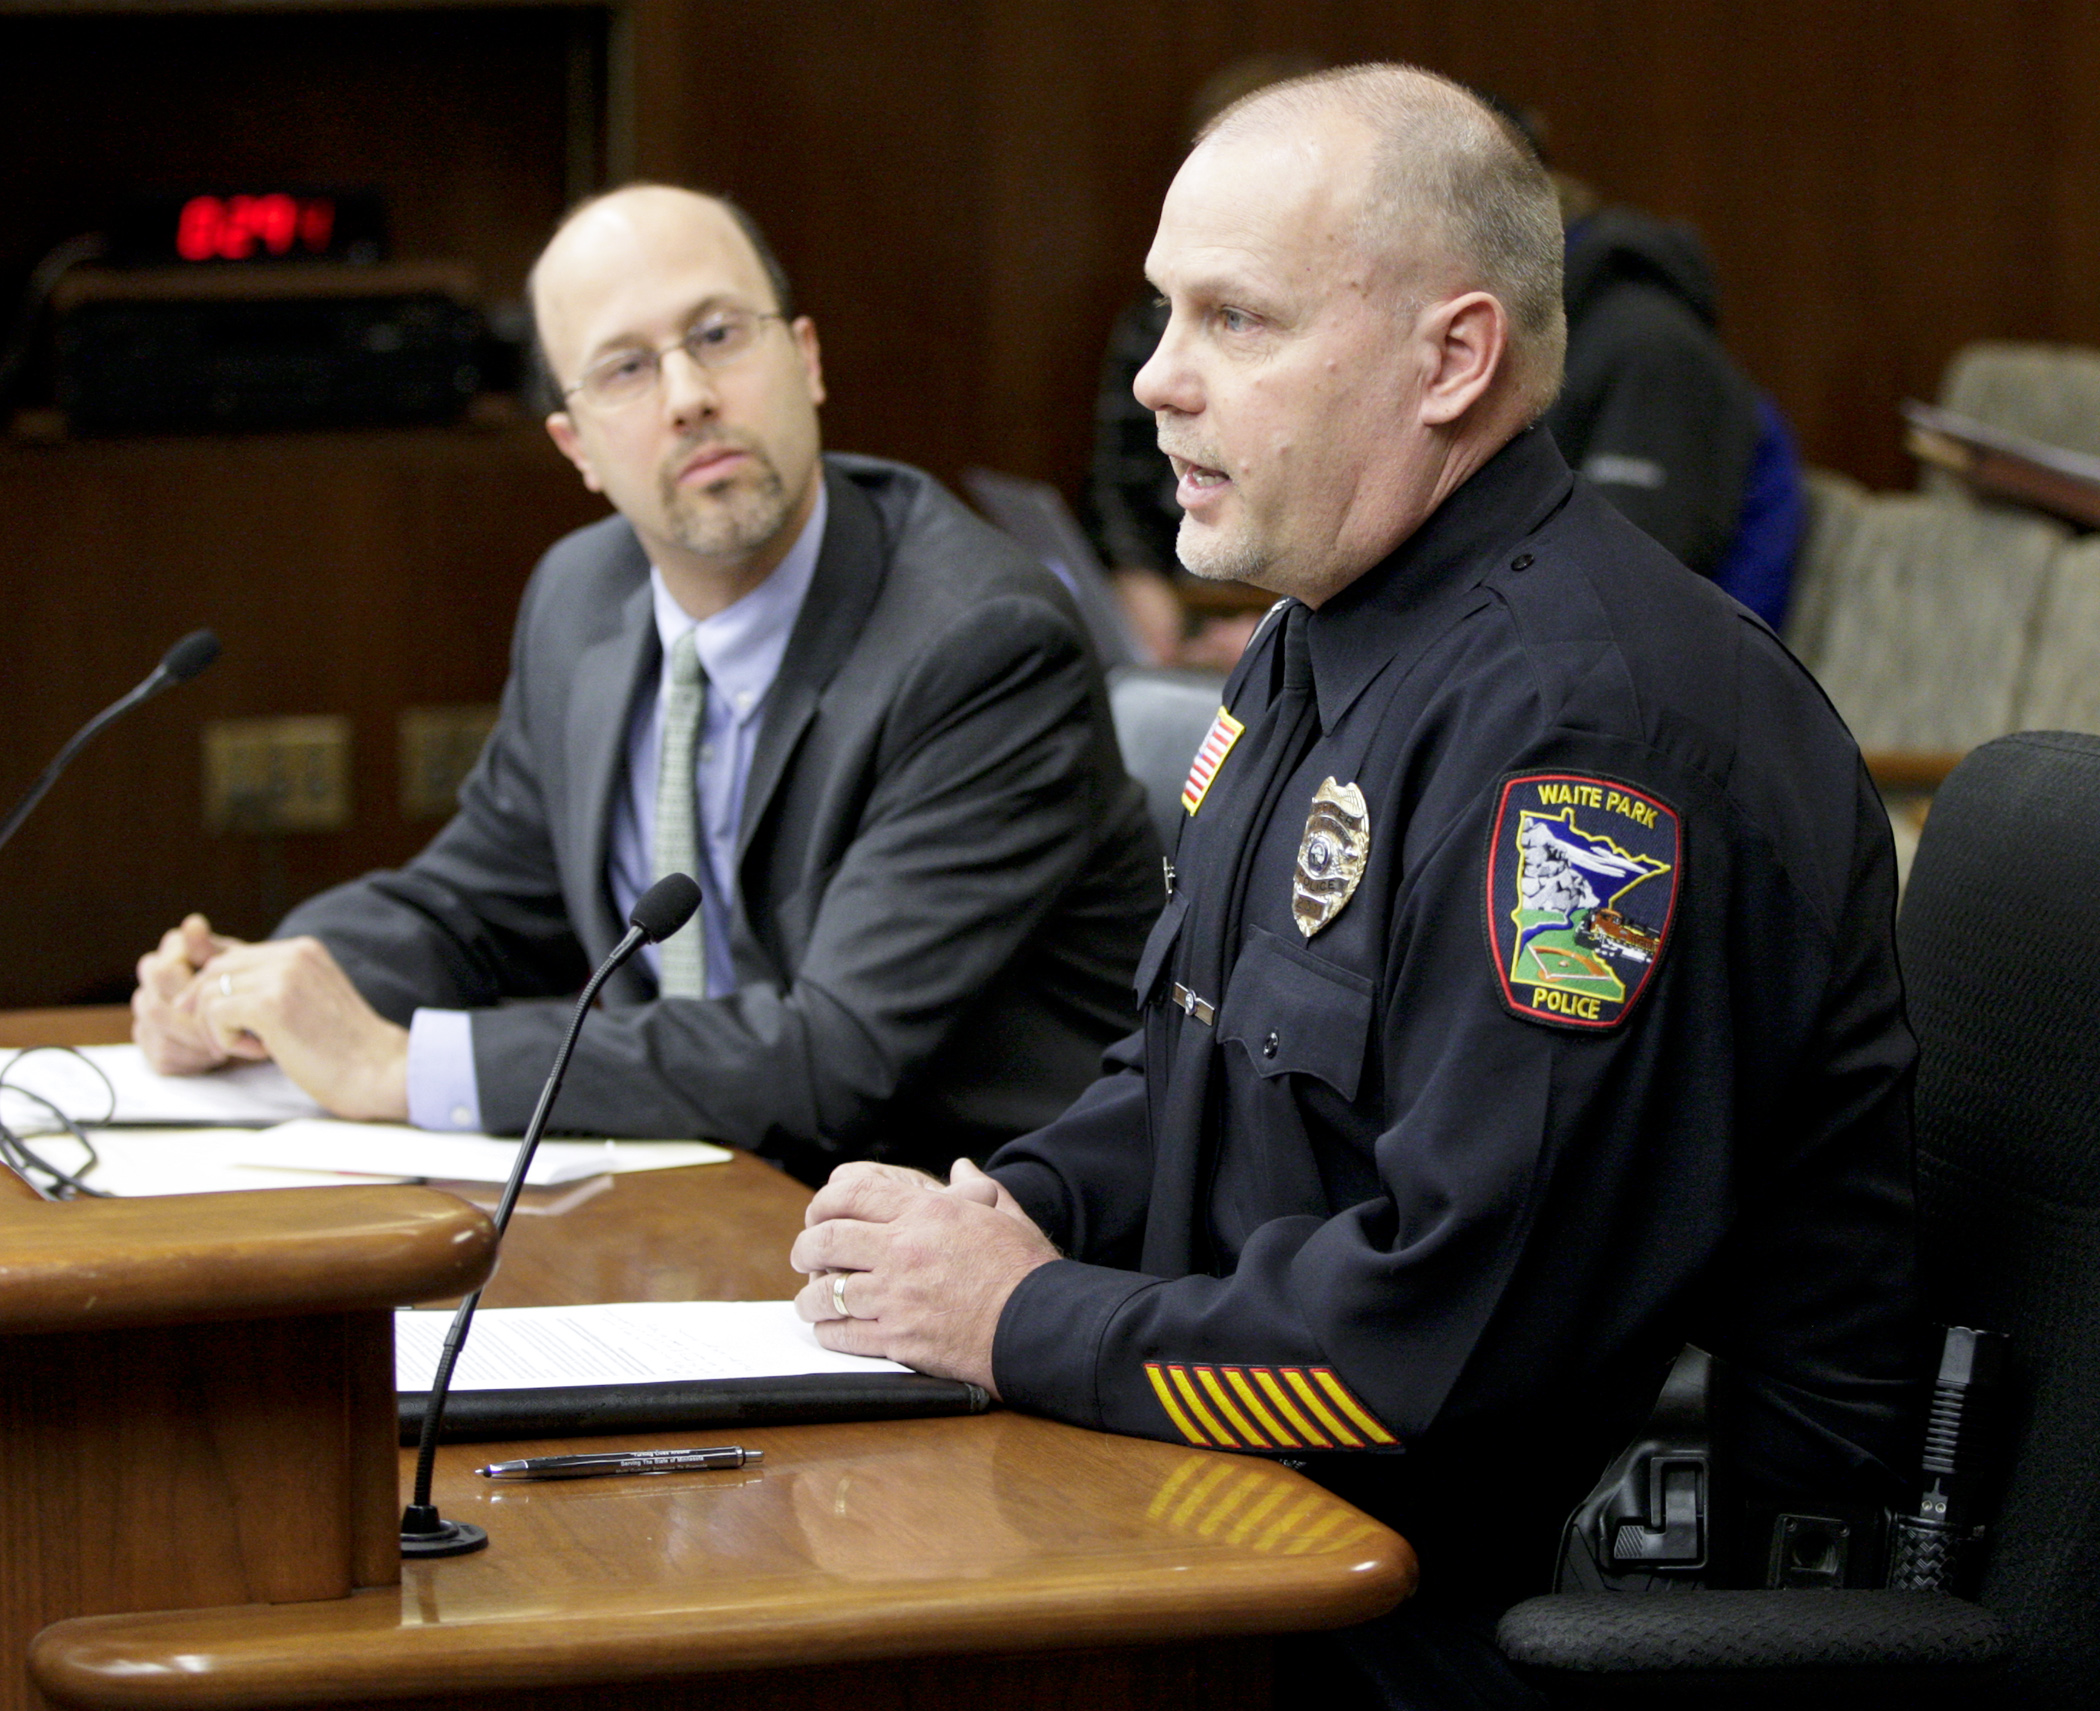 Timothy Deschene, an investigator with the Waite Park Police Department, testifies in favor of HF1776, sponsored by Rep. Dave Pinto, left, which would provide funding to combat sex trafficking crimes. Photo by Paul Battaglia